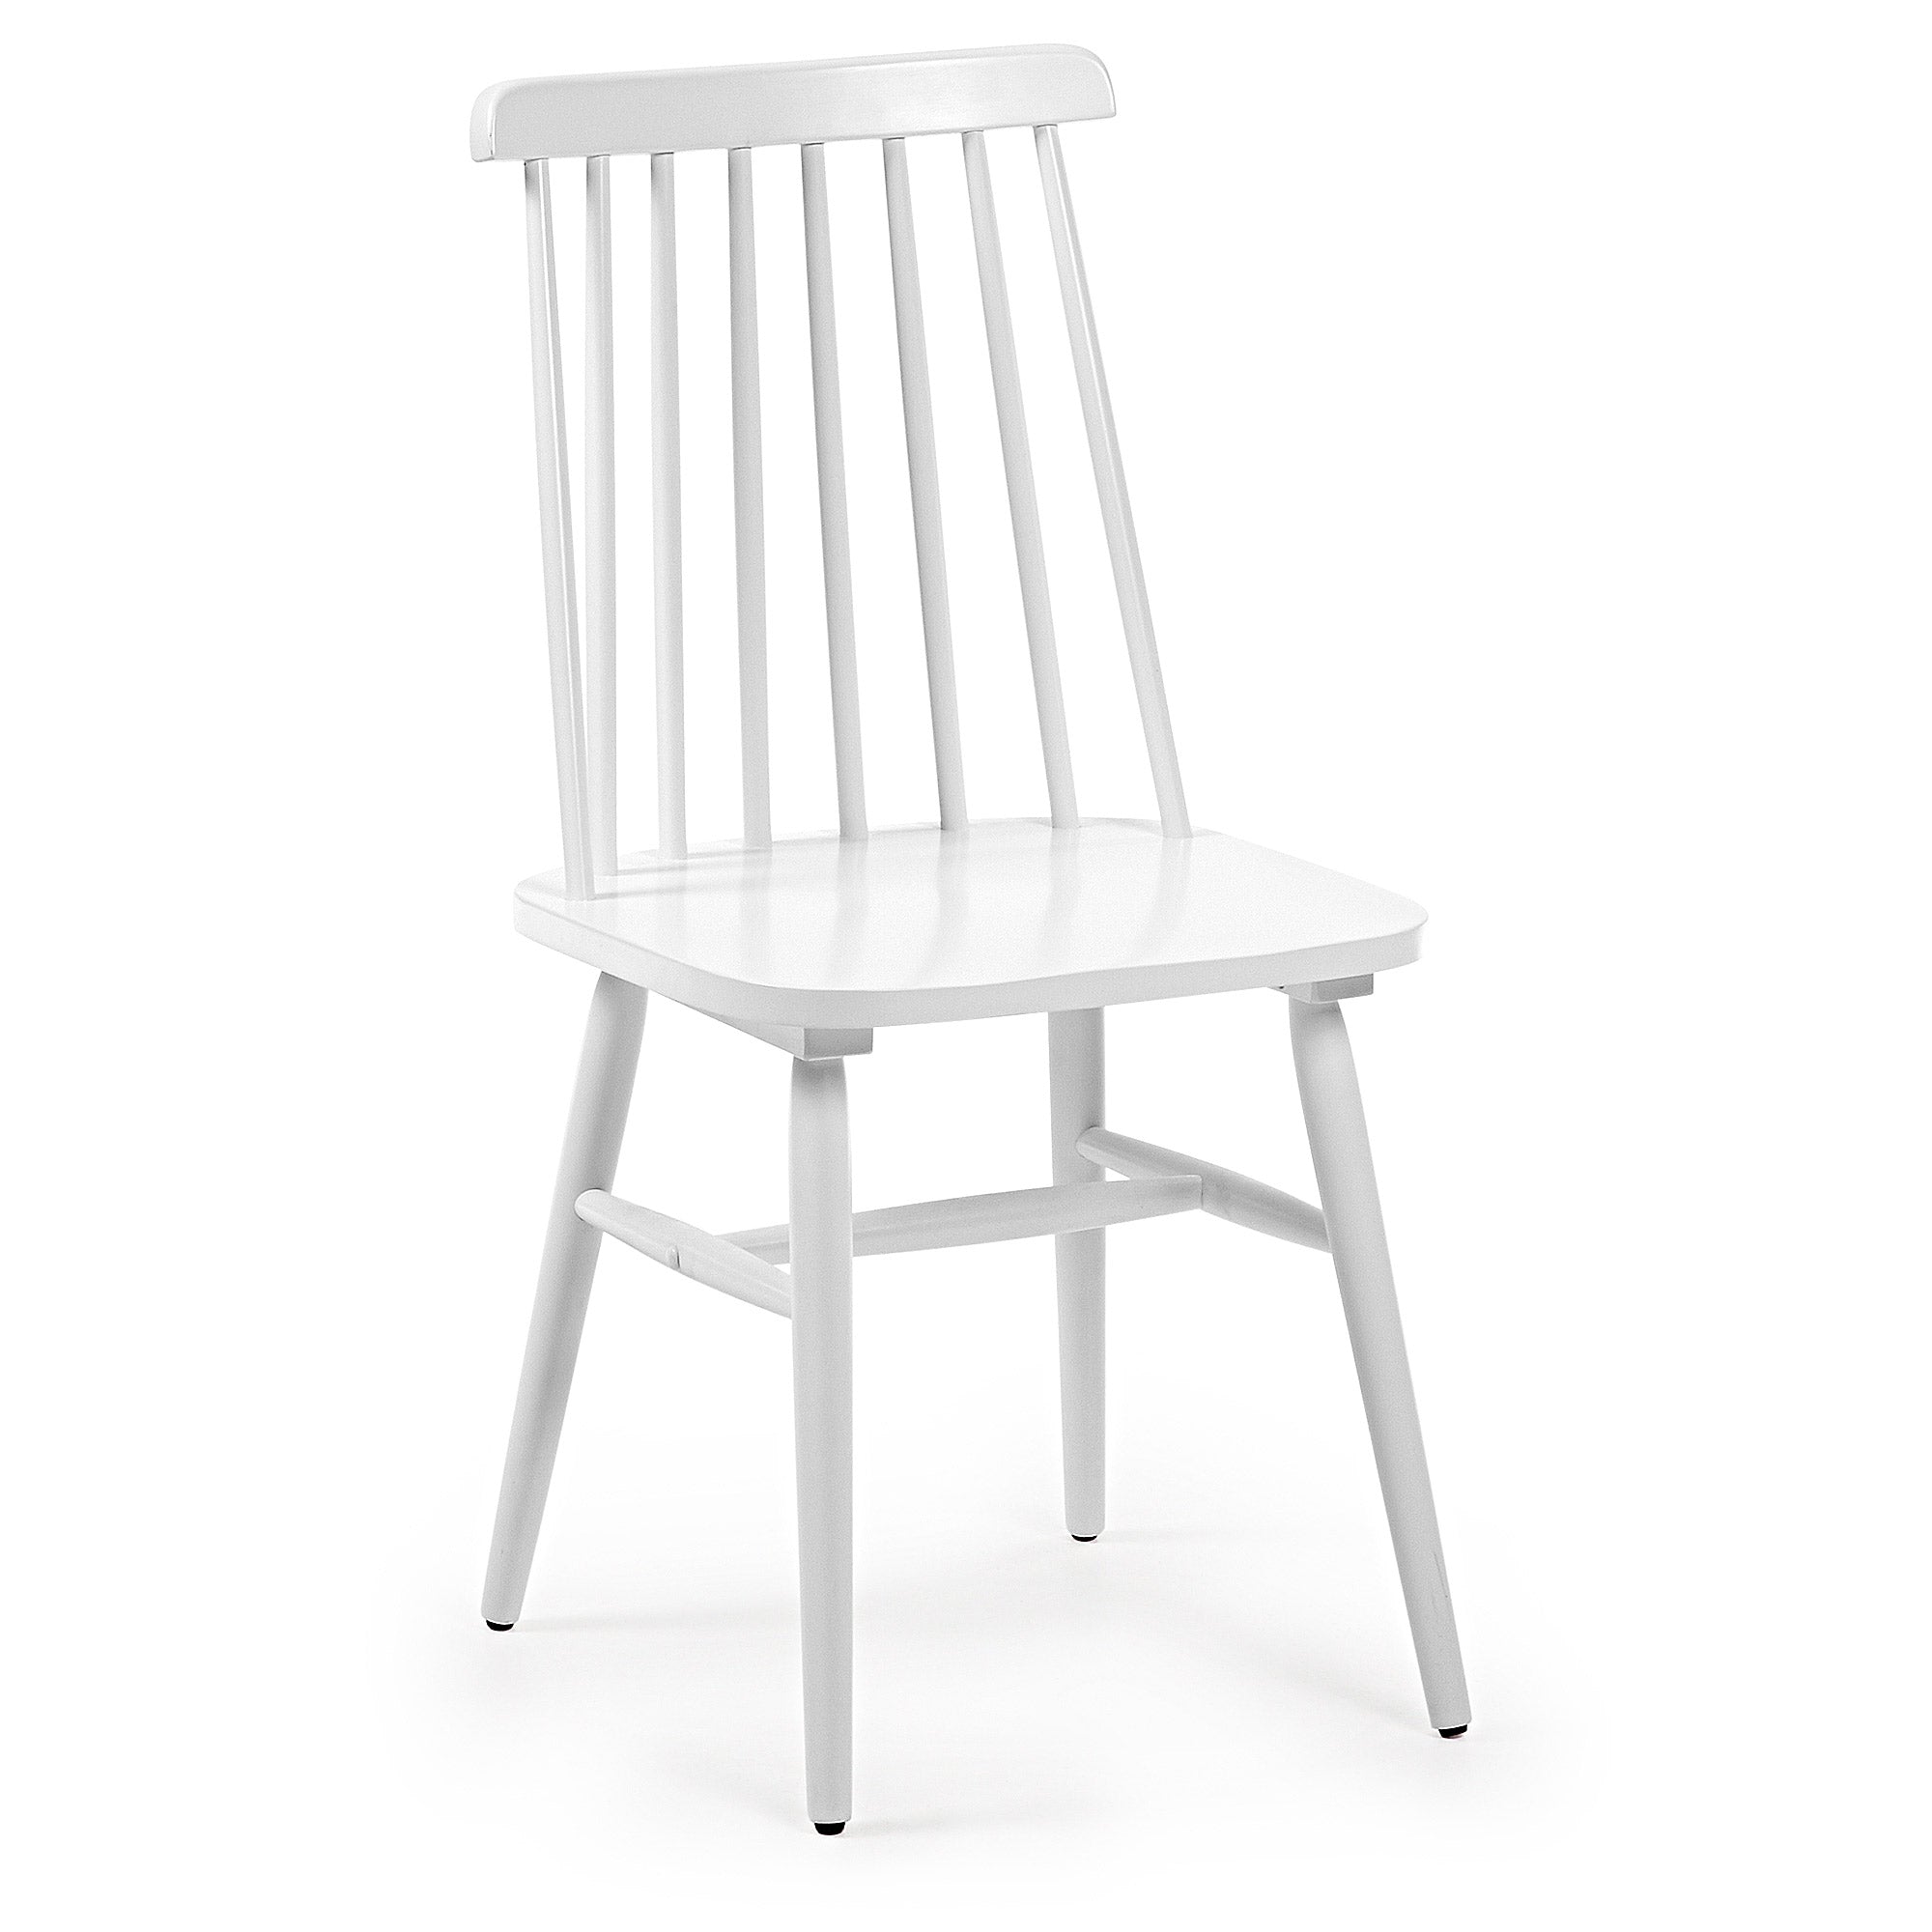 Tressia MDF and solid rubber wood chair with white lacquer